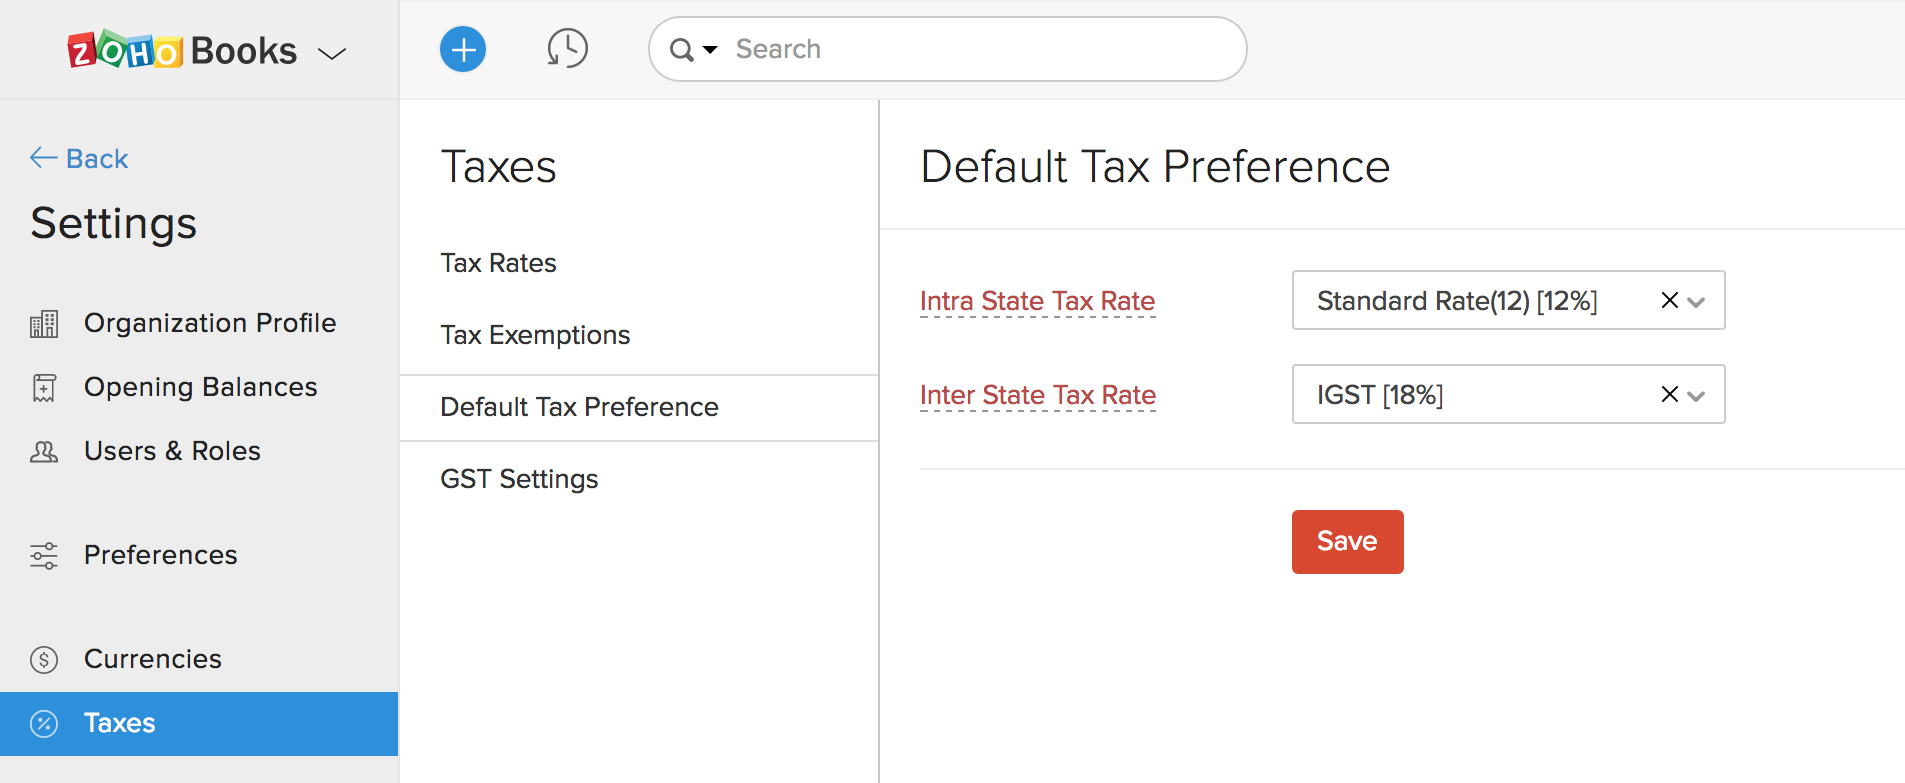 Default Tax Preference